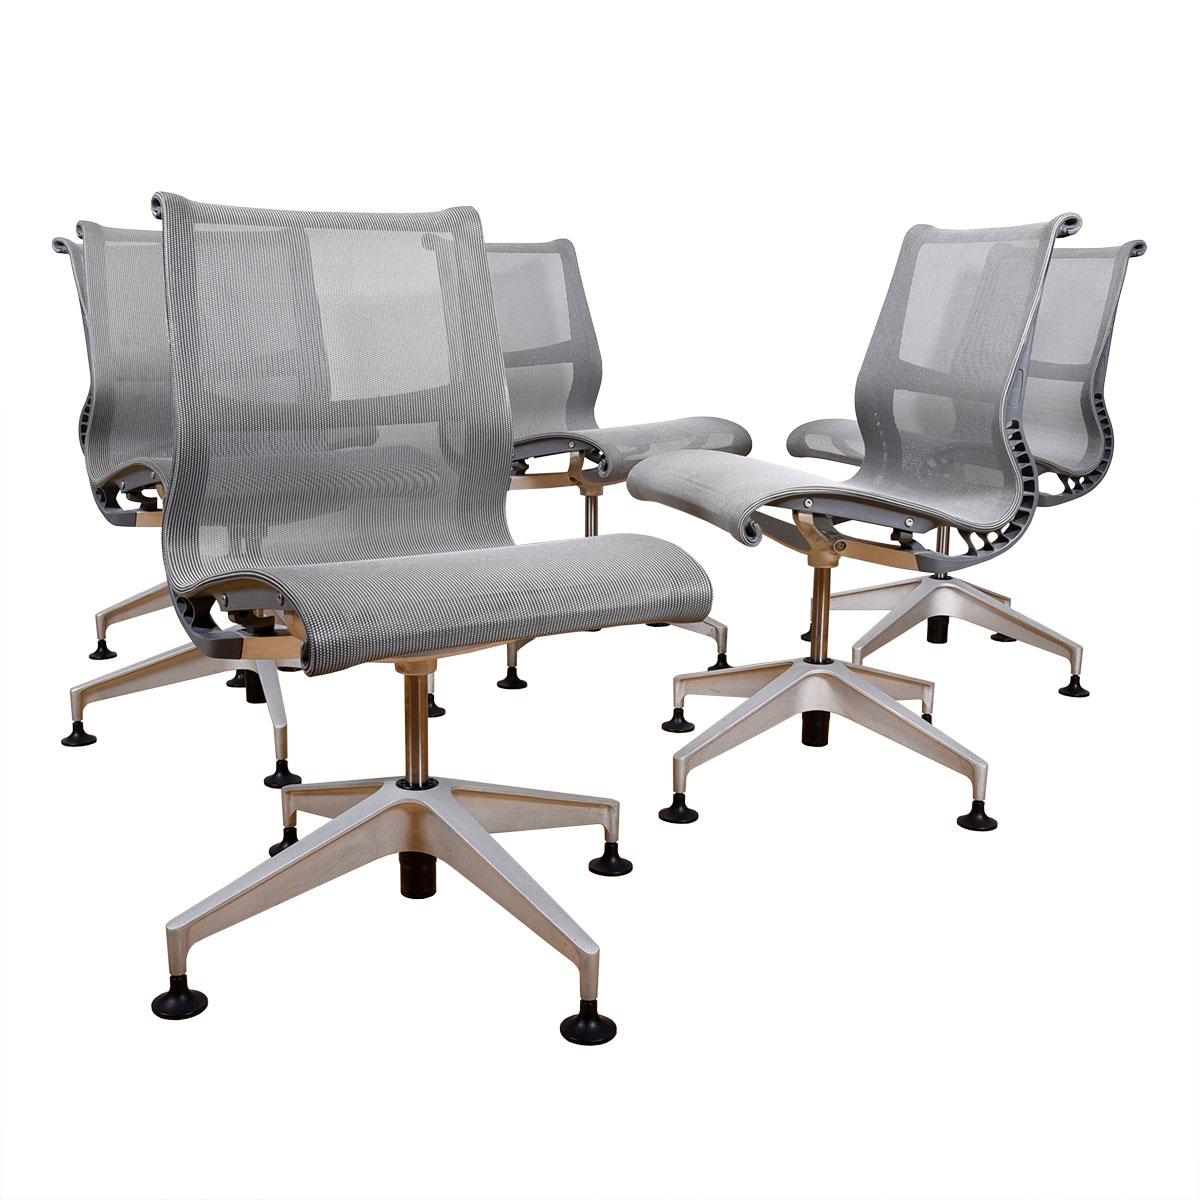 Set of 6 ‘Setu' Dining / Conference Chairs by Herman Miller

Additional information:
Featured at Kensington:
These chairs ever-so-comfortably-recline - offering impressive comfort tailored by the weight of each individual.
Whether you’re